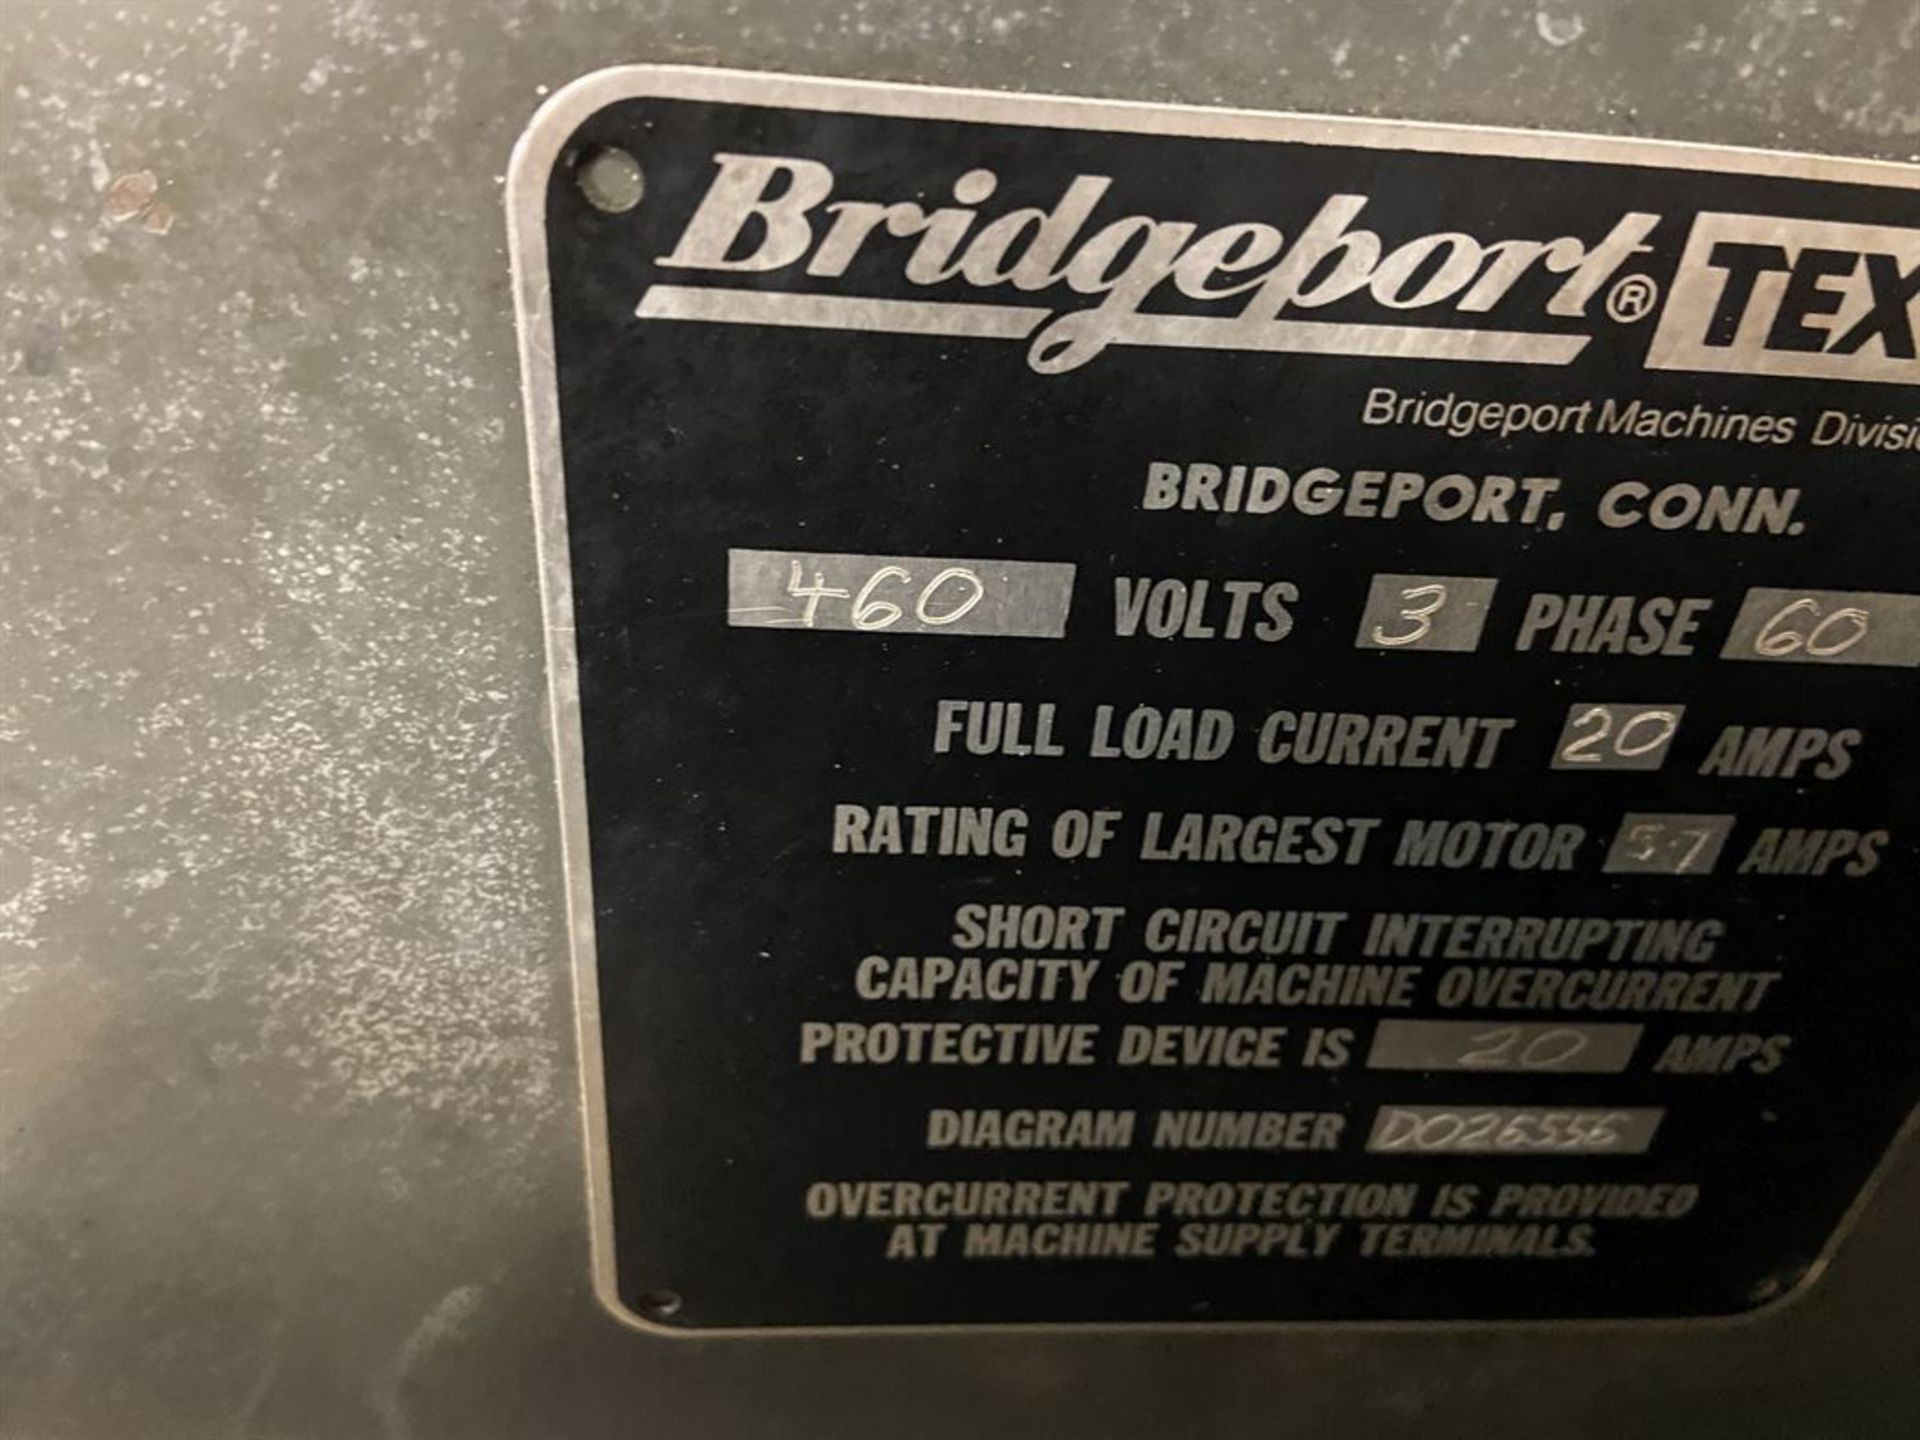 Bridgeport Series II Vertical Mill, 11x58 Tbl, 4 HP, Quill Feed, Power Knee, DRO, s/n DO26556 - Image 8 of 9